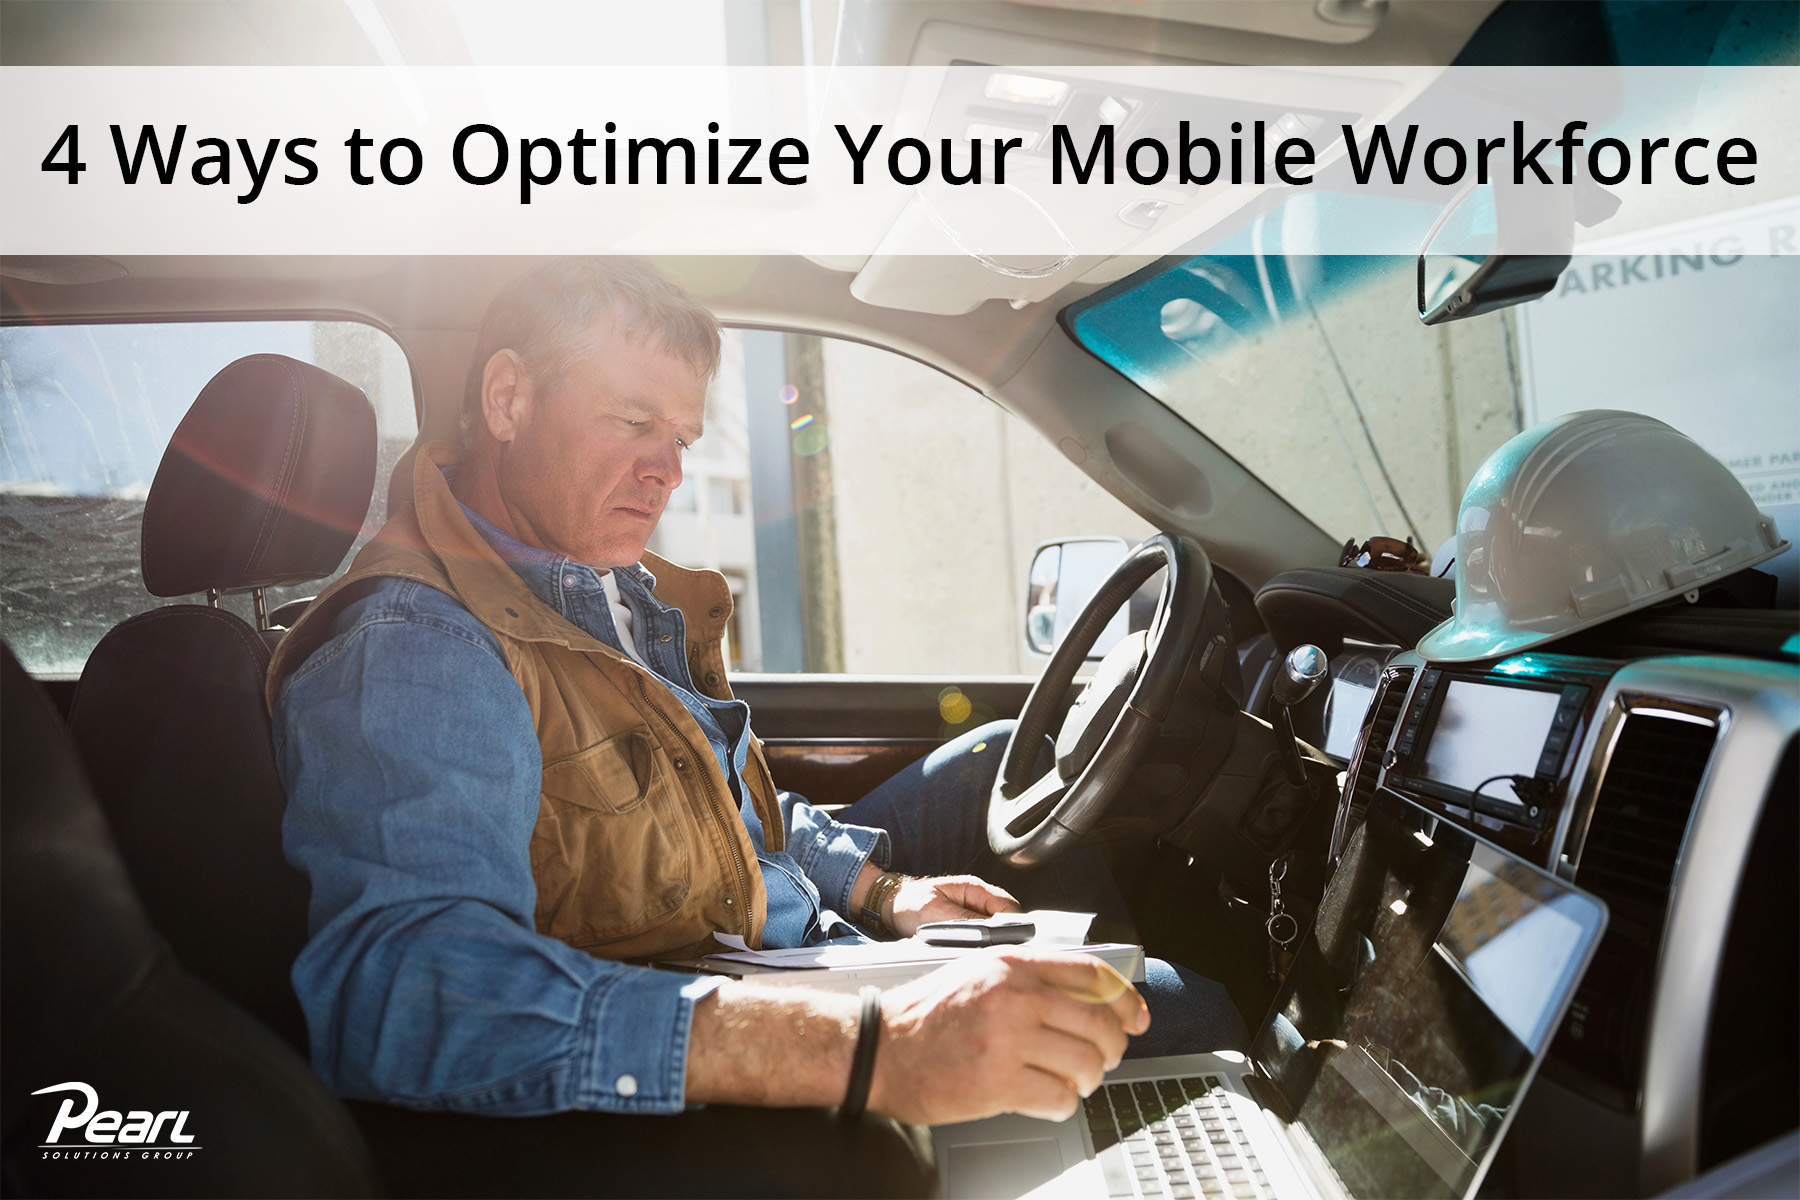 Optimize Your Mobile Workforce